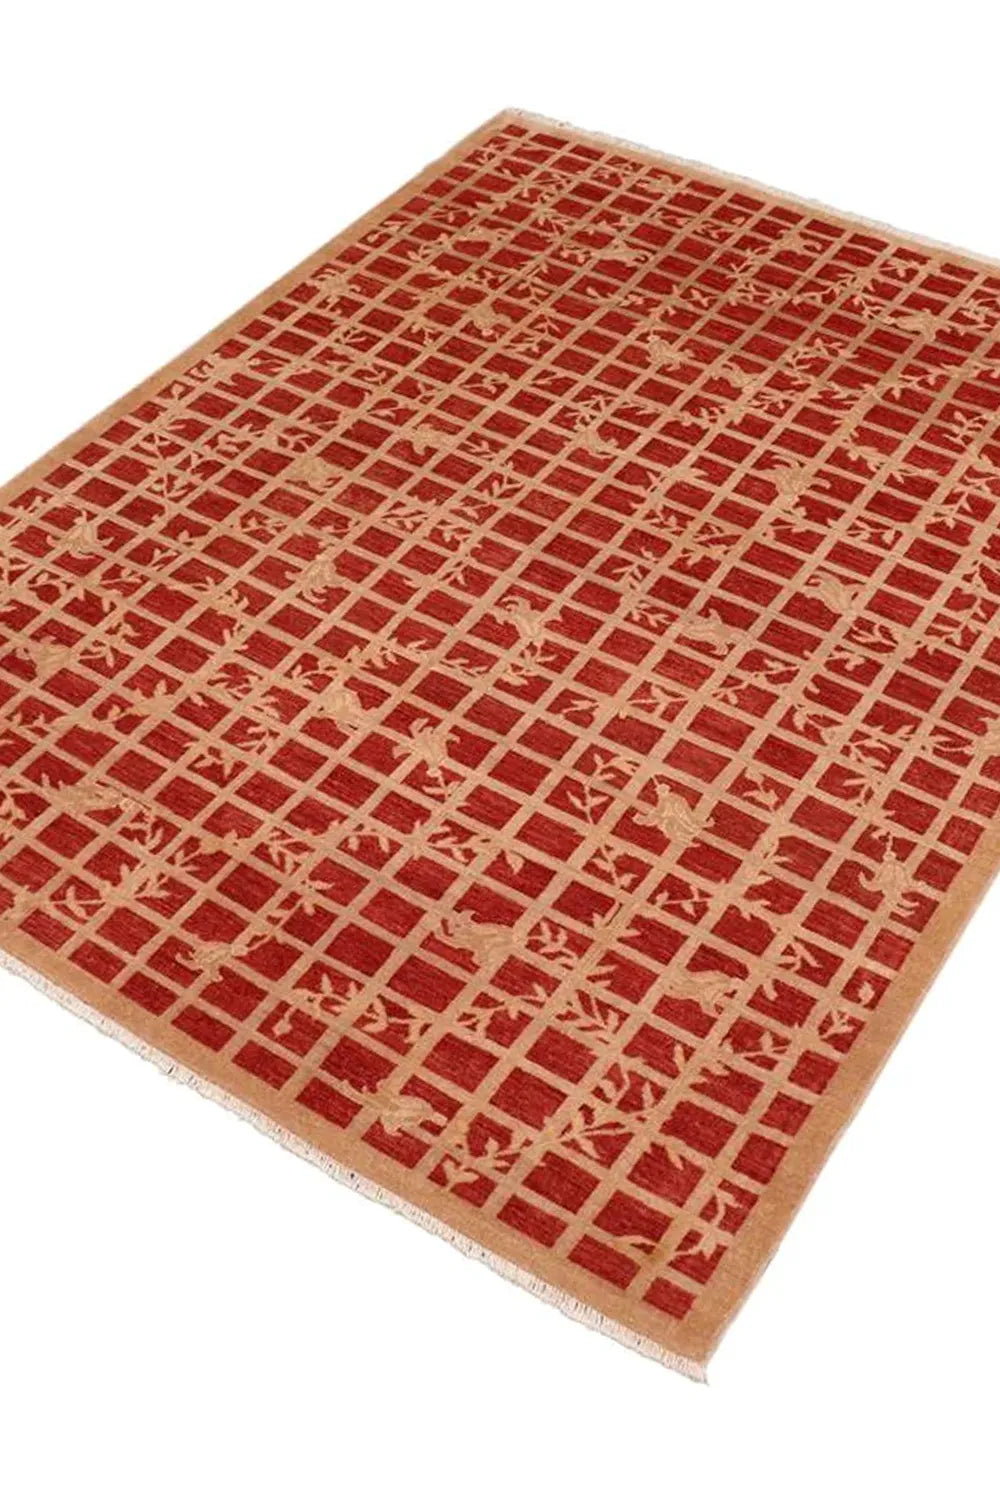 Red and brown grid pattern wool carpet, handcrafted for timeless elegance.